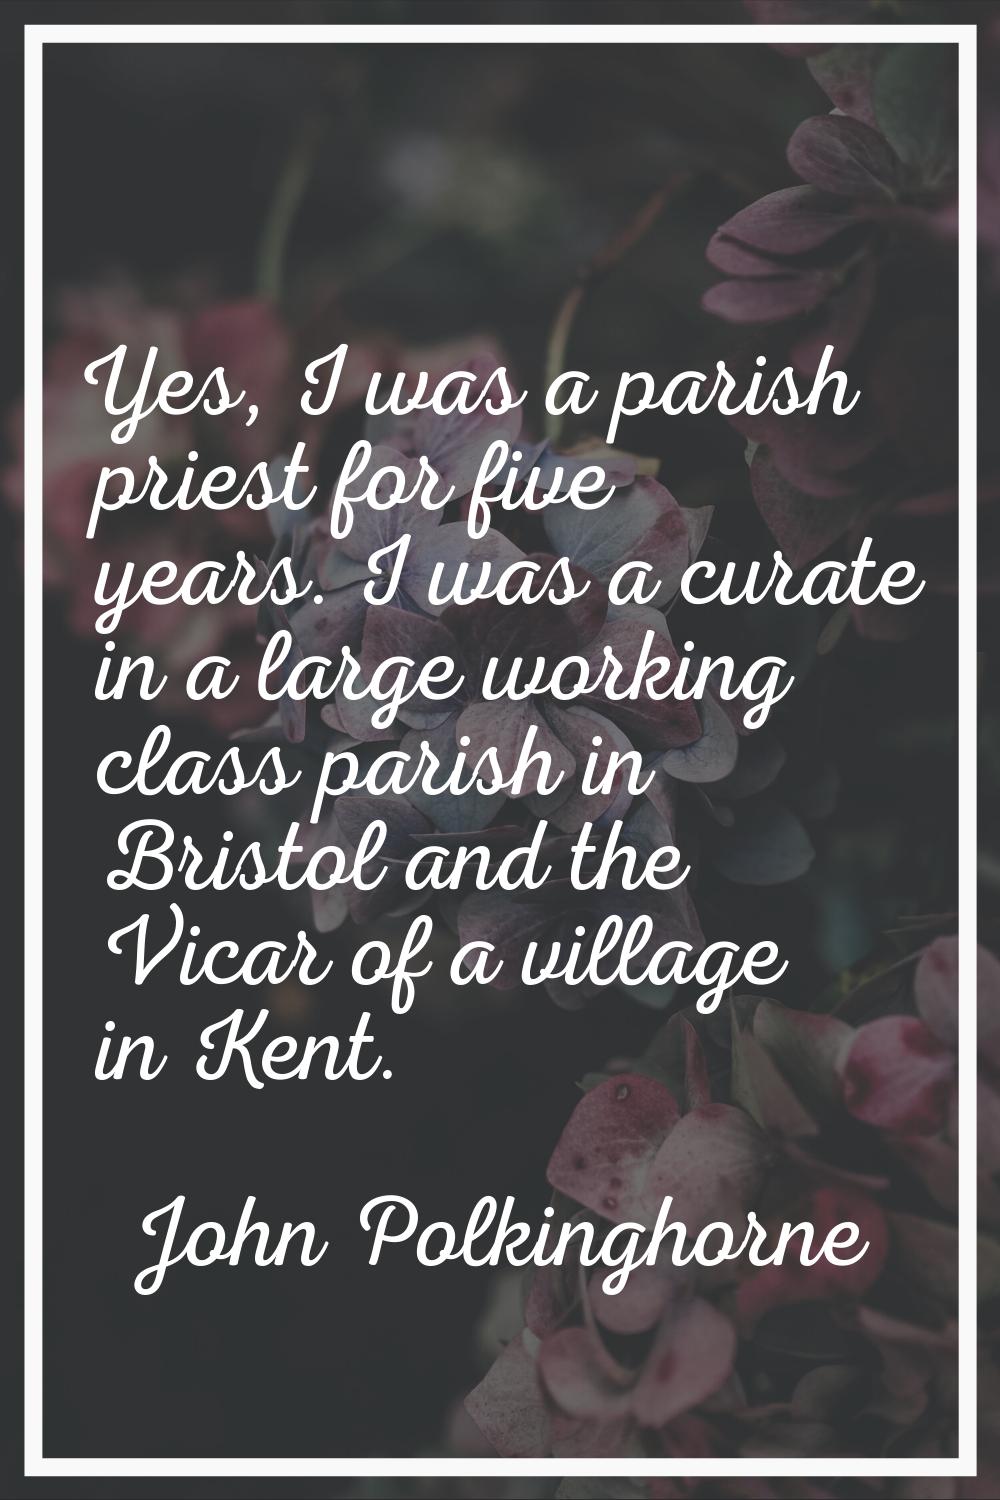 Yes, I was a parish priest for five years. I was a curate in a large working class parish in Bristo